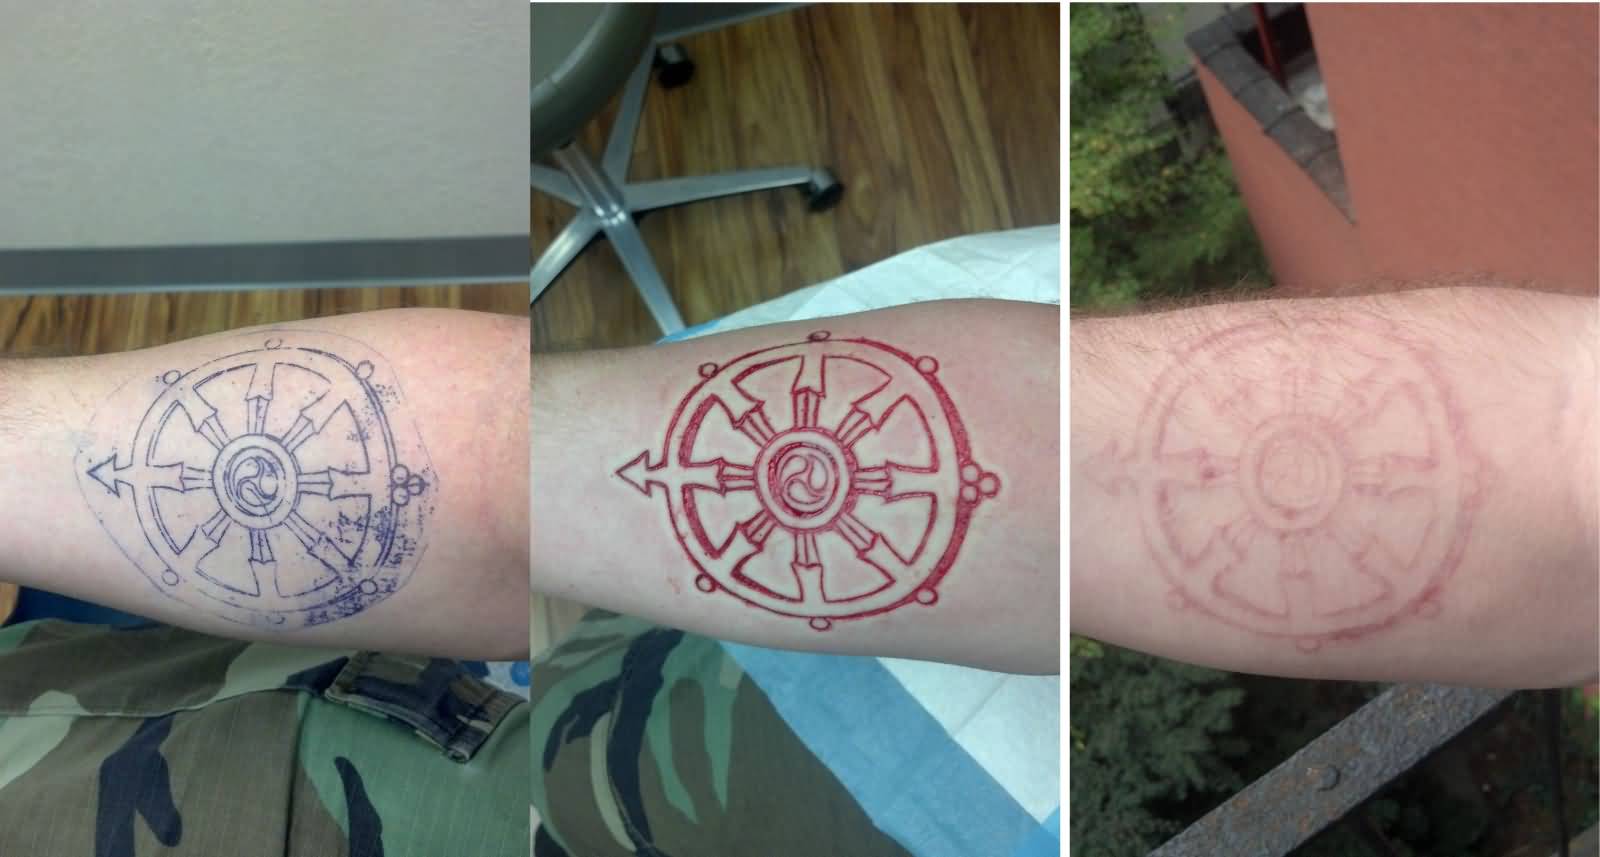 Ship Wheel Before And After Scarification Tattoo On Forearm